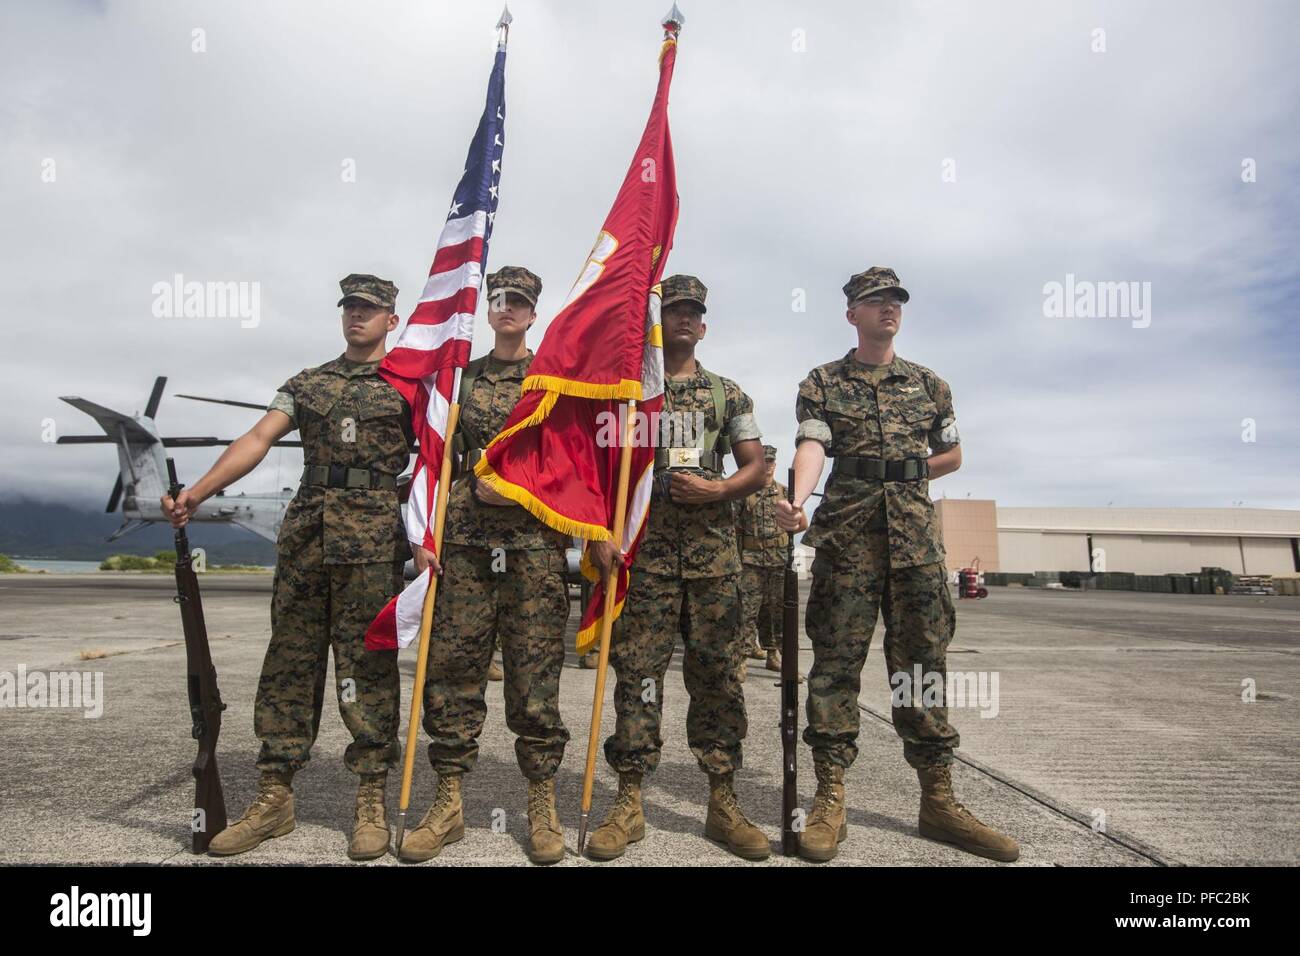 U.S. Marines with Marine Unmanned Aerial Vehicle Squadron 3 (VMU-3) color guard standby before a change of command ceremony, Marine Corps Air Station Kaneohe Bay, Marine Corps Base Hawaii, June 7, 2018. Lt. Col. Kenneth Phelps retired and relinquished command of VMU-3 to Lt. Col. Peter Ban. Stock Photo